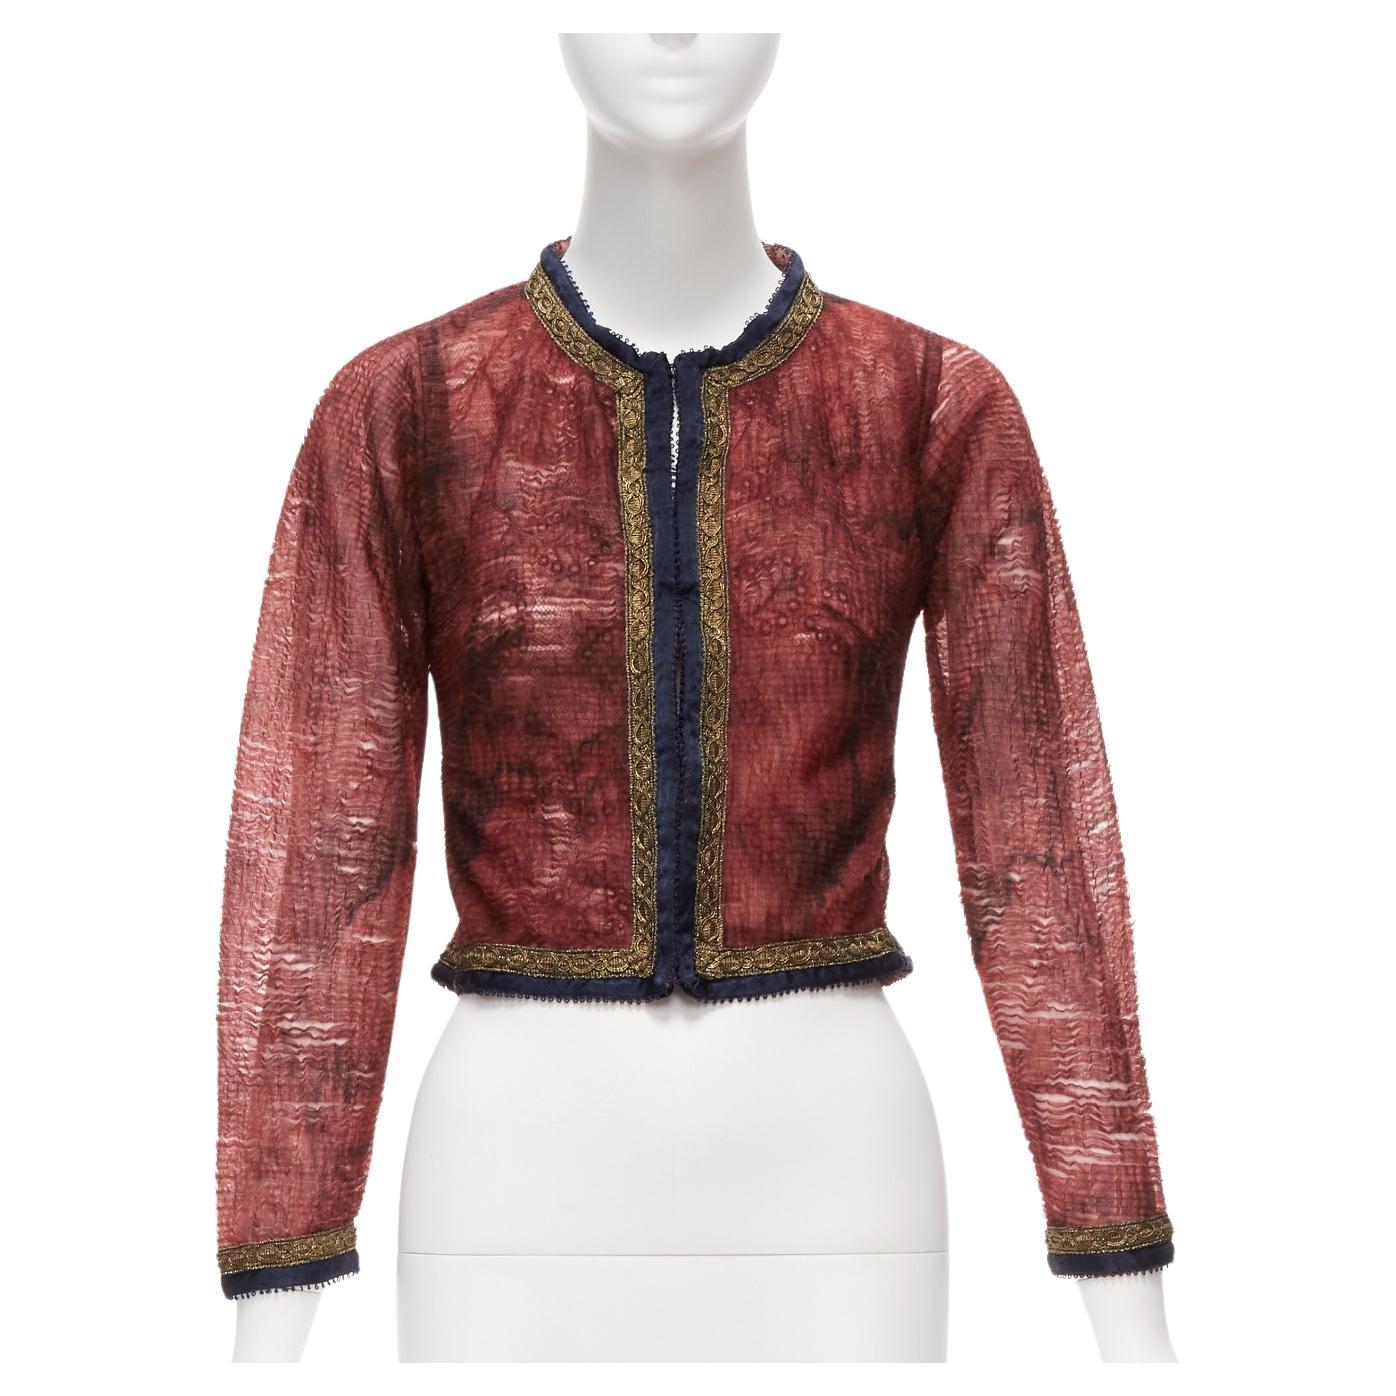 VOYAGE INVEST IN THE ORIGINAL LONDON sheer gold satin lace trim cropped jacket For Sale